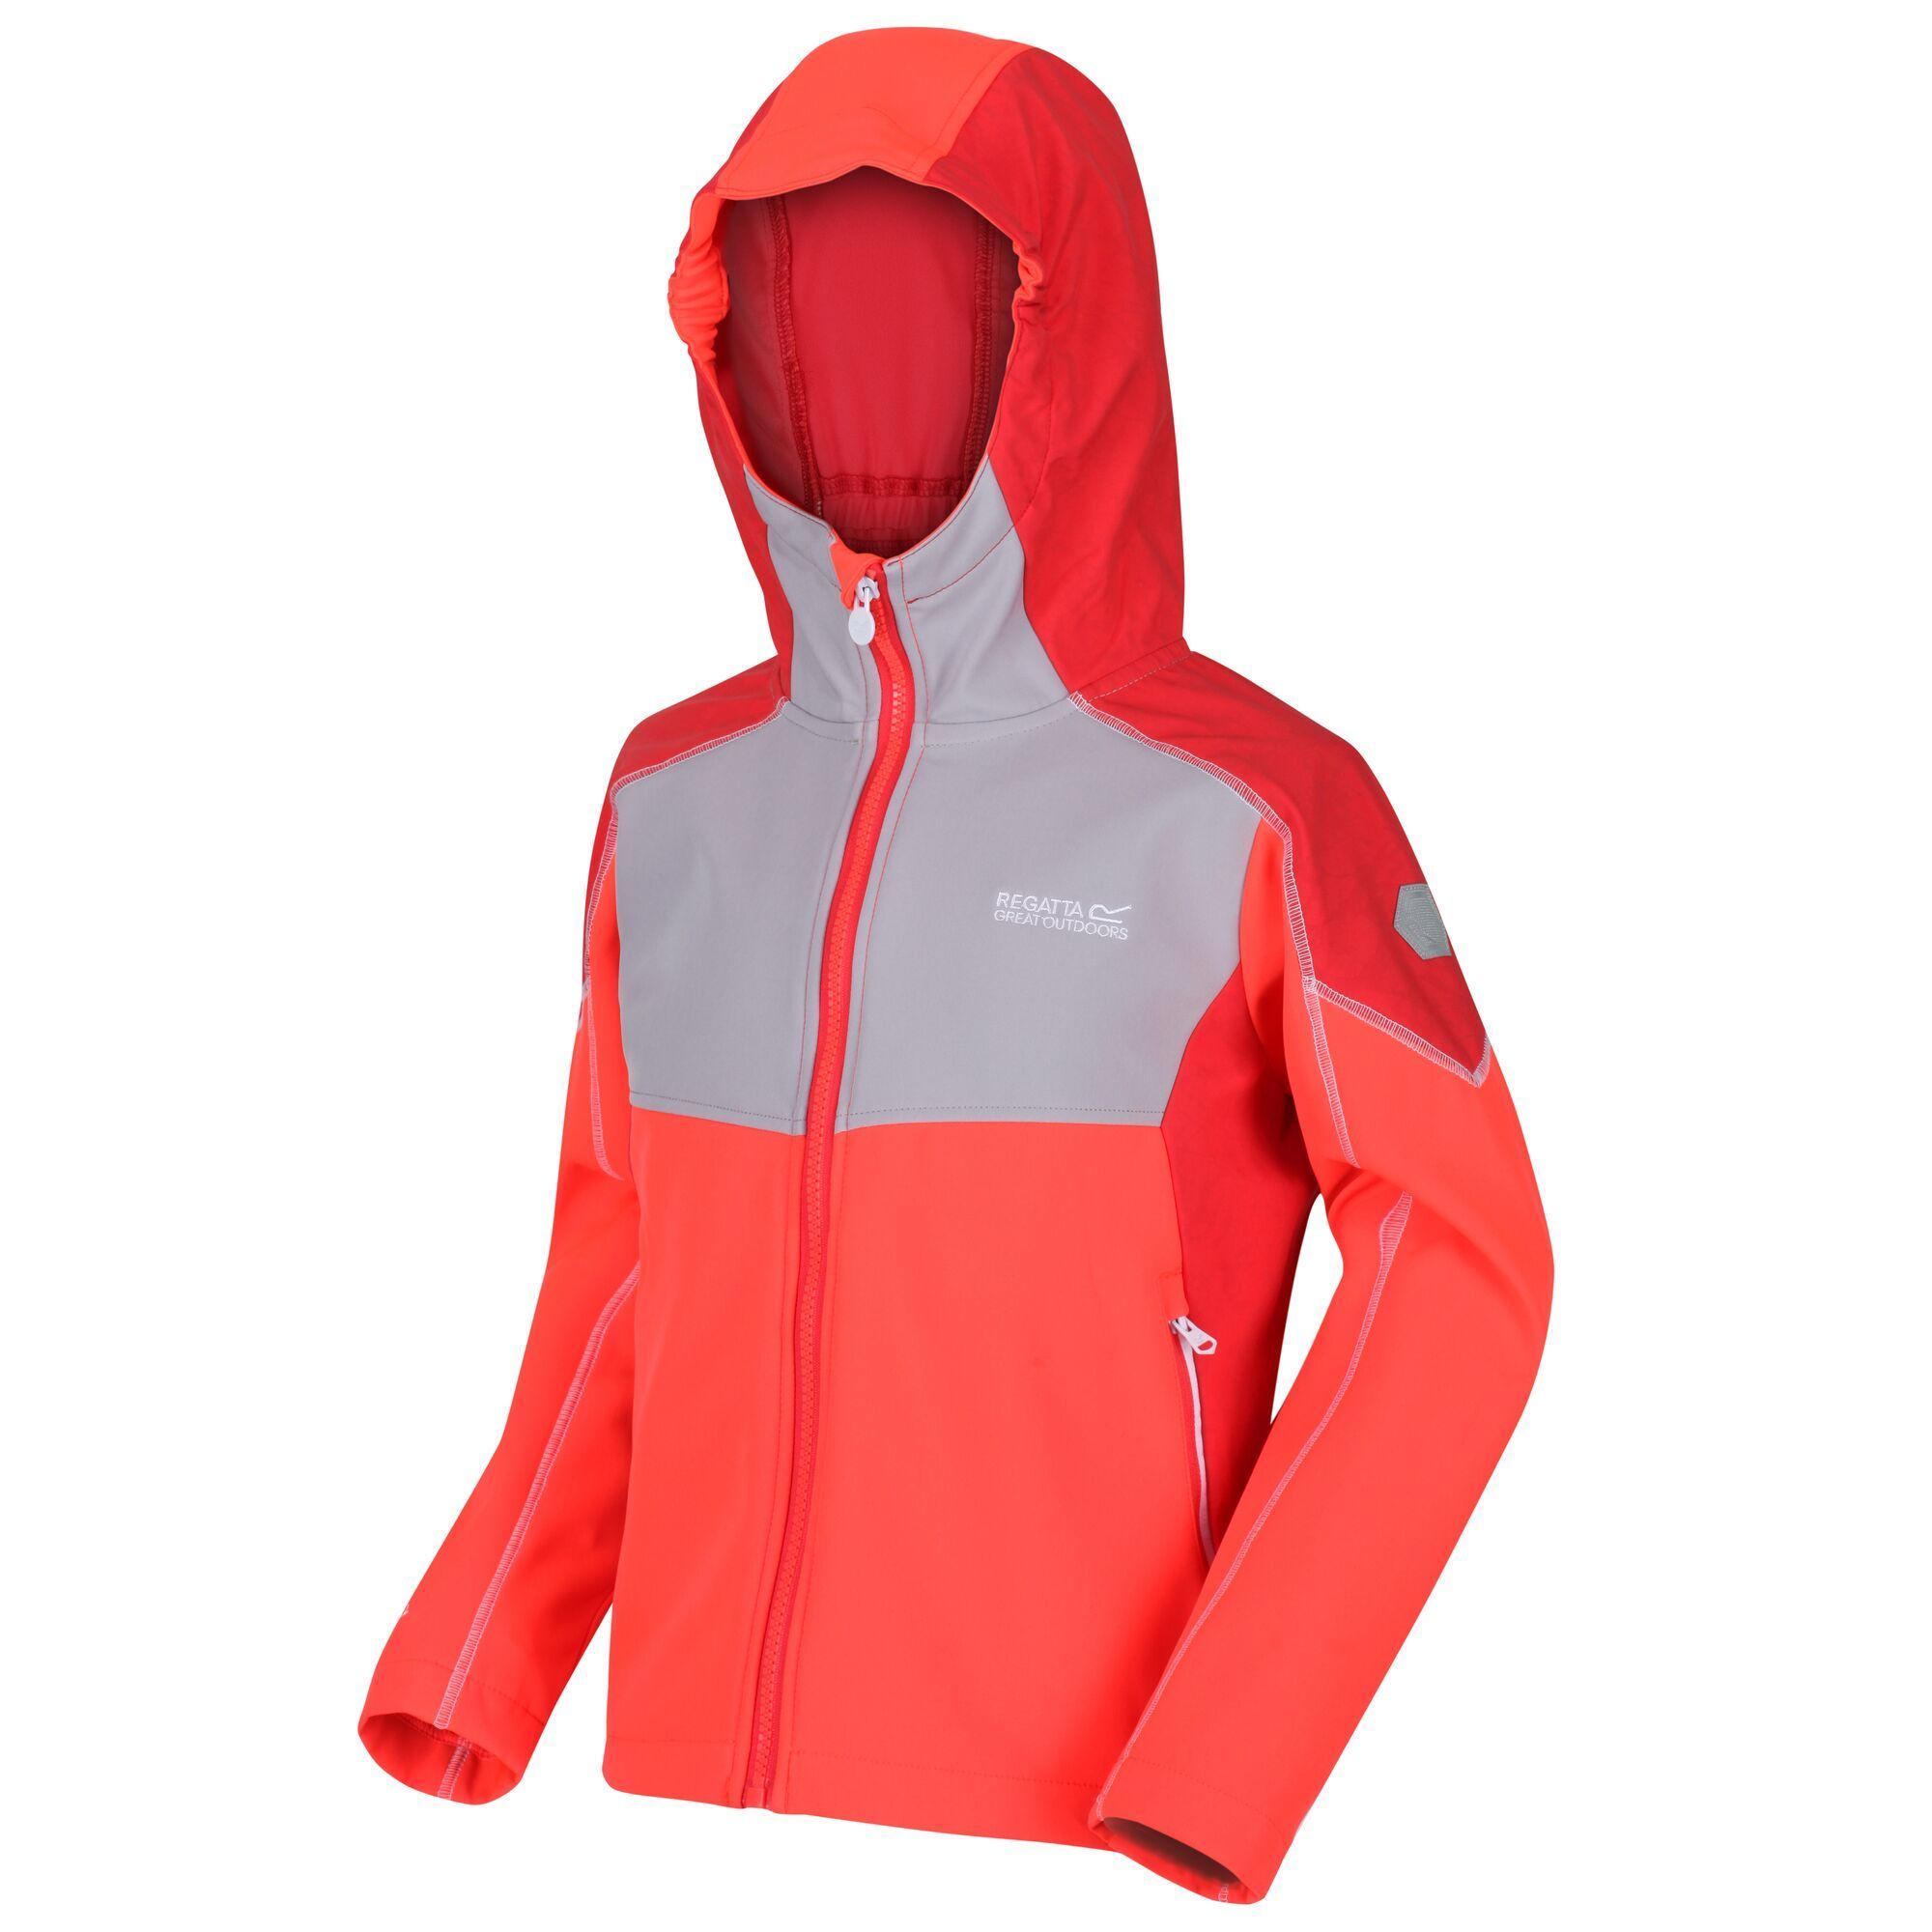 Material: 96% Polyester, 4% Elastane. Durable, water-repellent and lightweight softshell fabric jacket with elasticated hood. Highly reflective printed panels. Wind resistant. 2 zipped lower pockets.